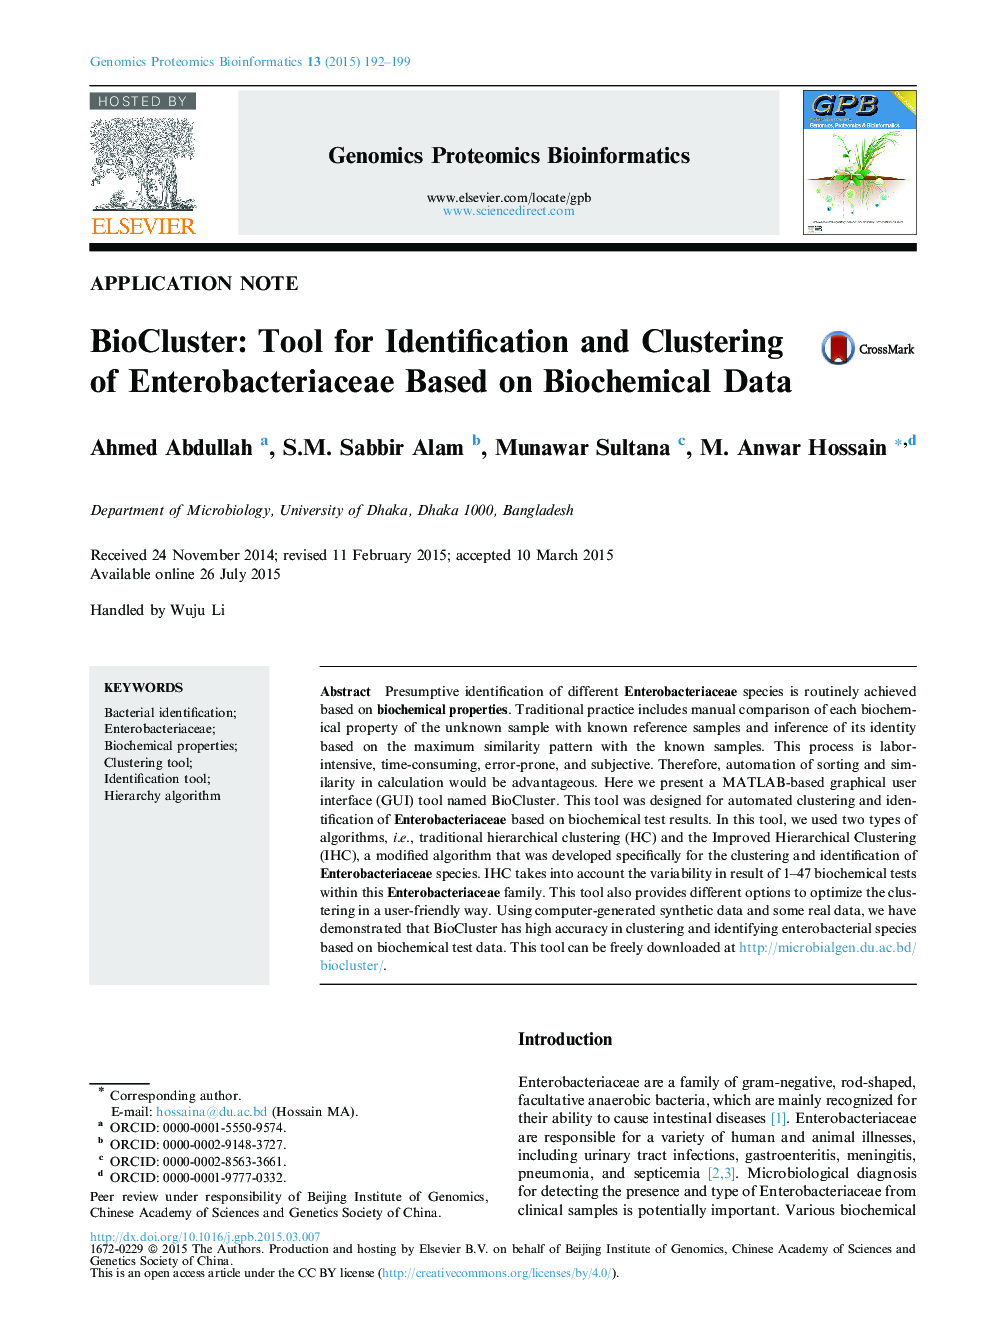 BioCluster: Tool for Identification and Clustering of Enterobacteriaceae Based on Biochemical Data 